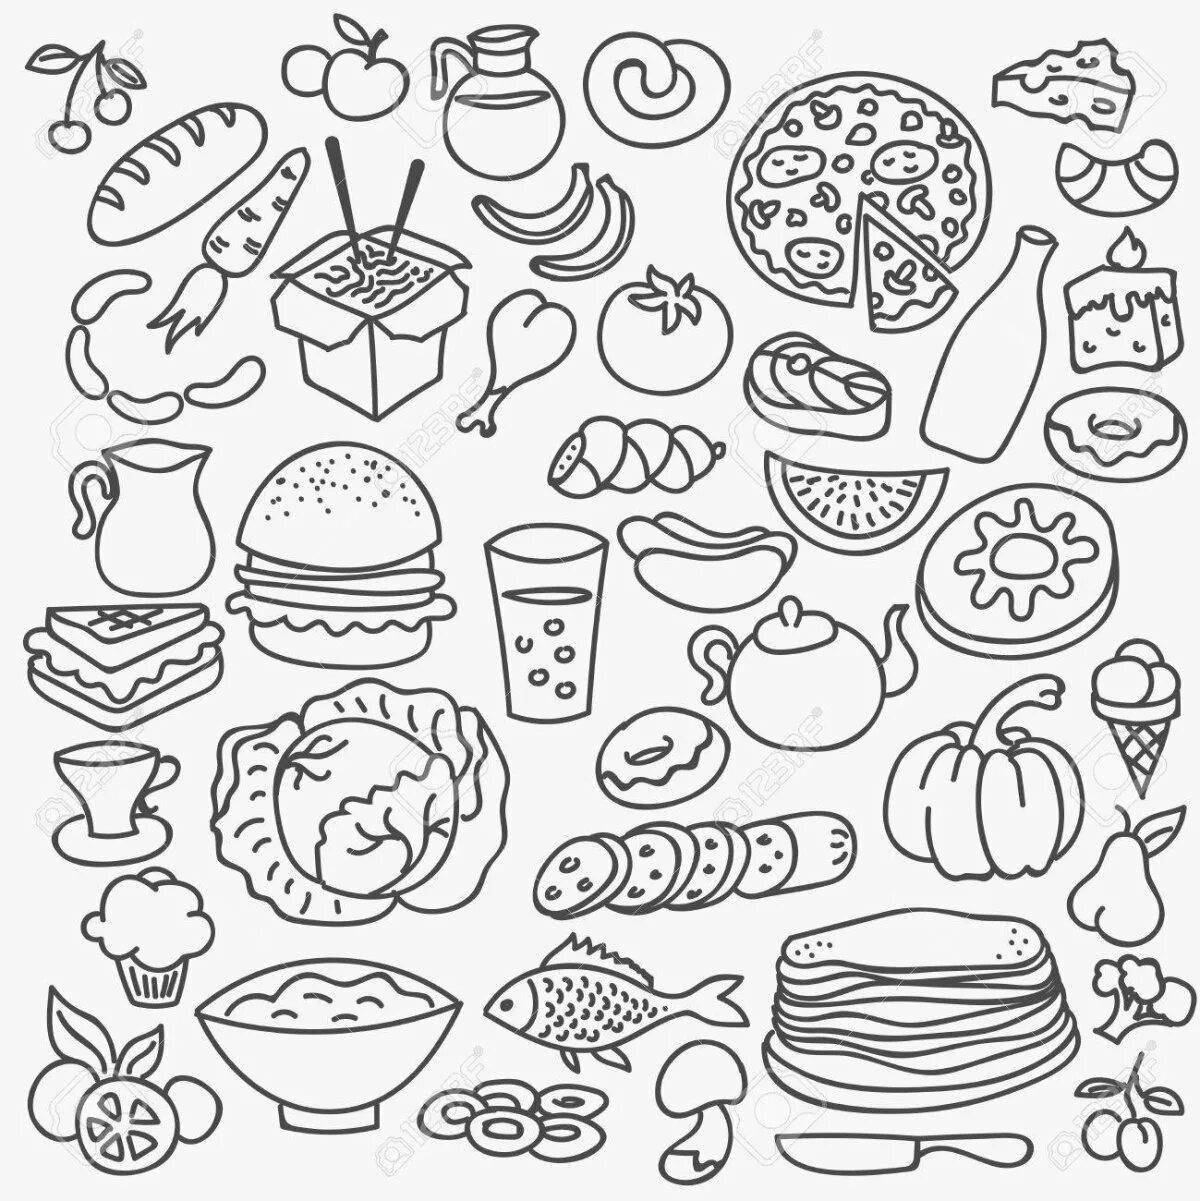 Doll food coloring page